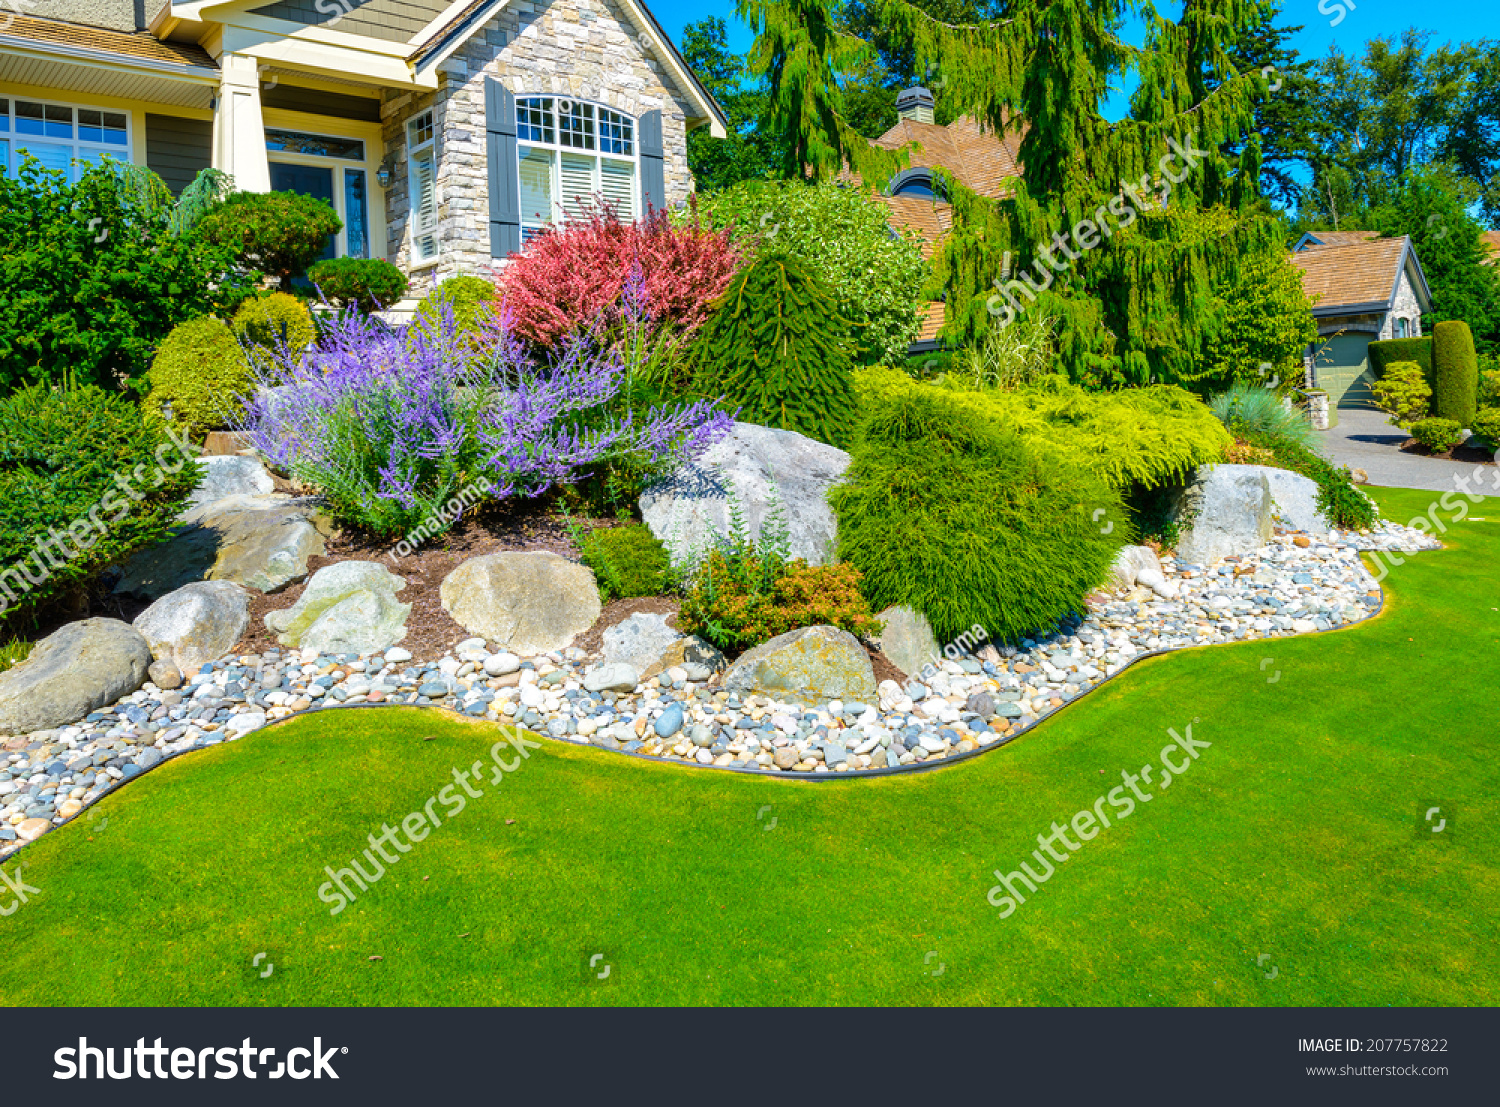 Flowers Stones Front House Front Yard Stock Photo Edit Now  - Pictures Of Landscaping In Front Of House